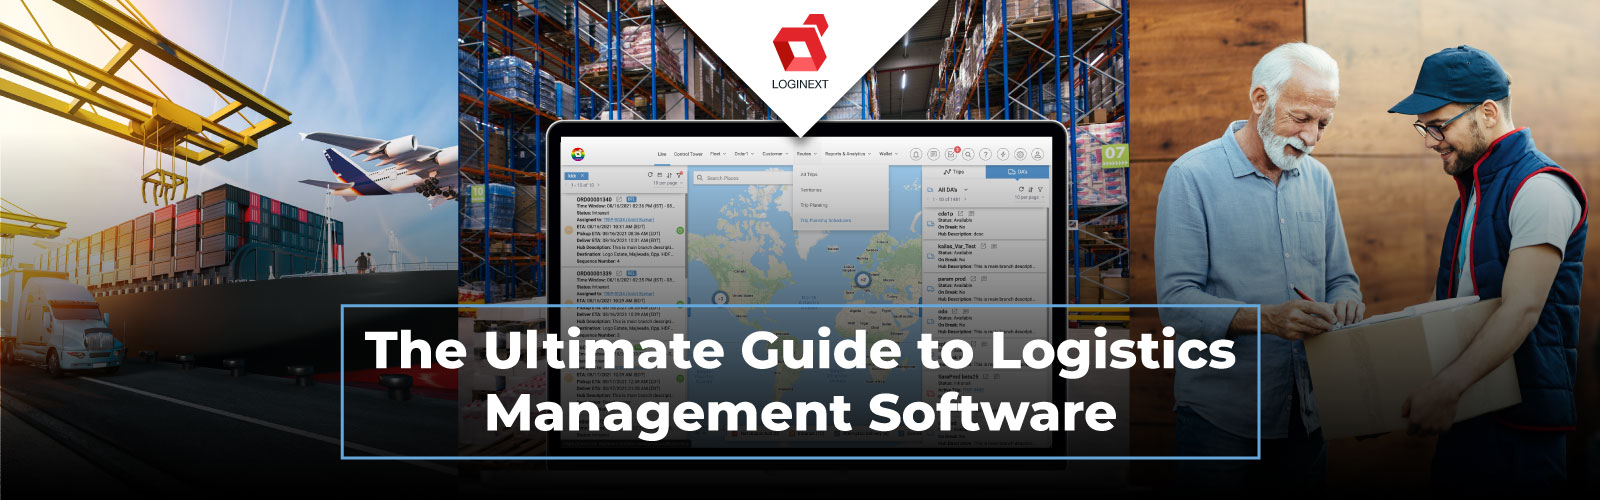 The Ultimate Guide to Logistics Management Software: Everything You Need to Know